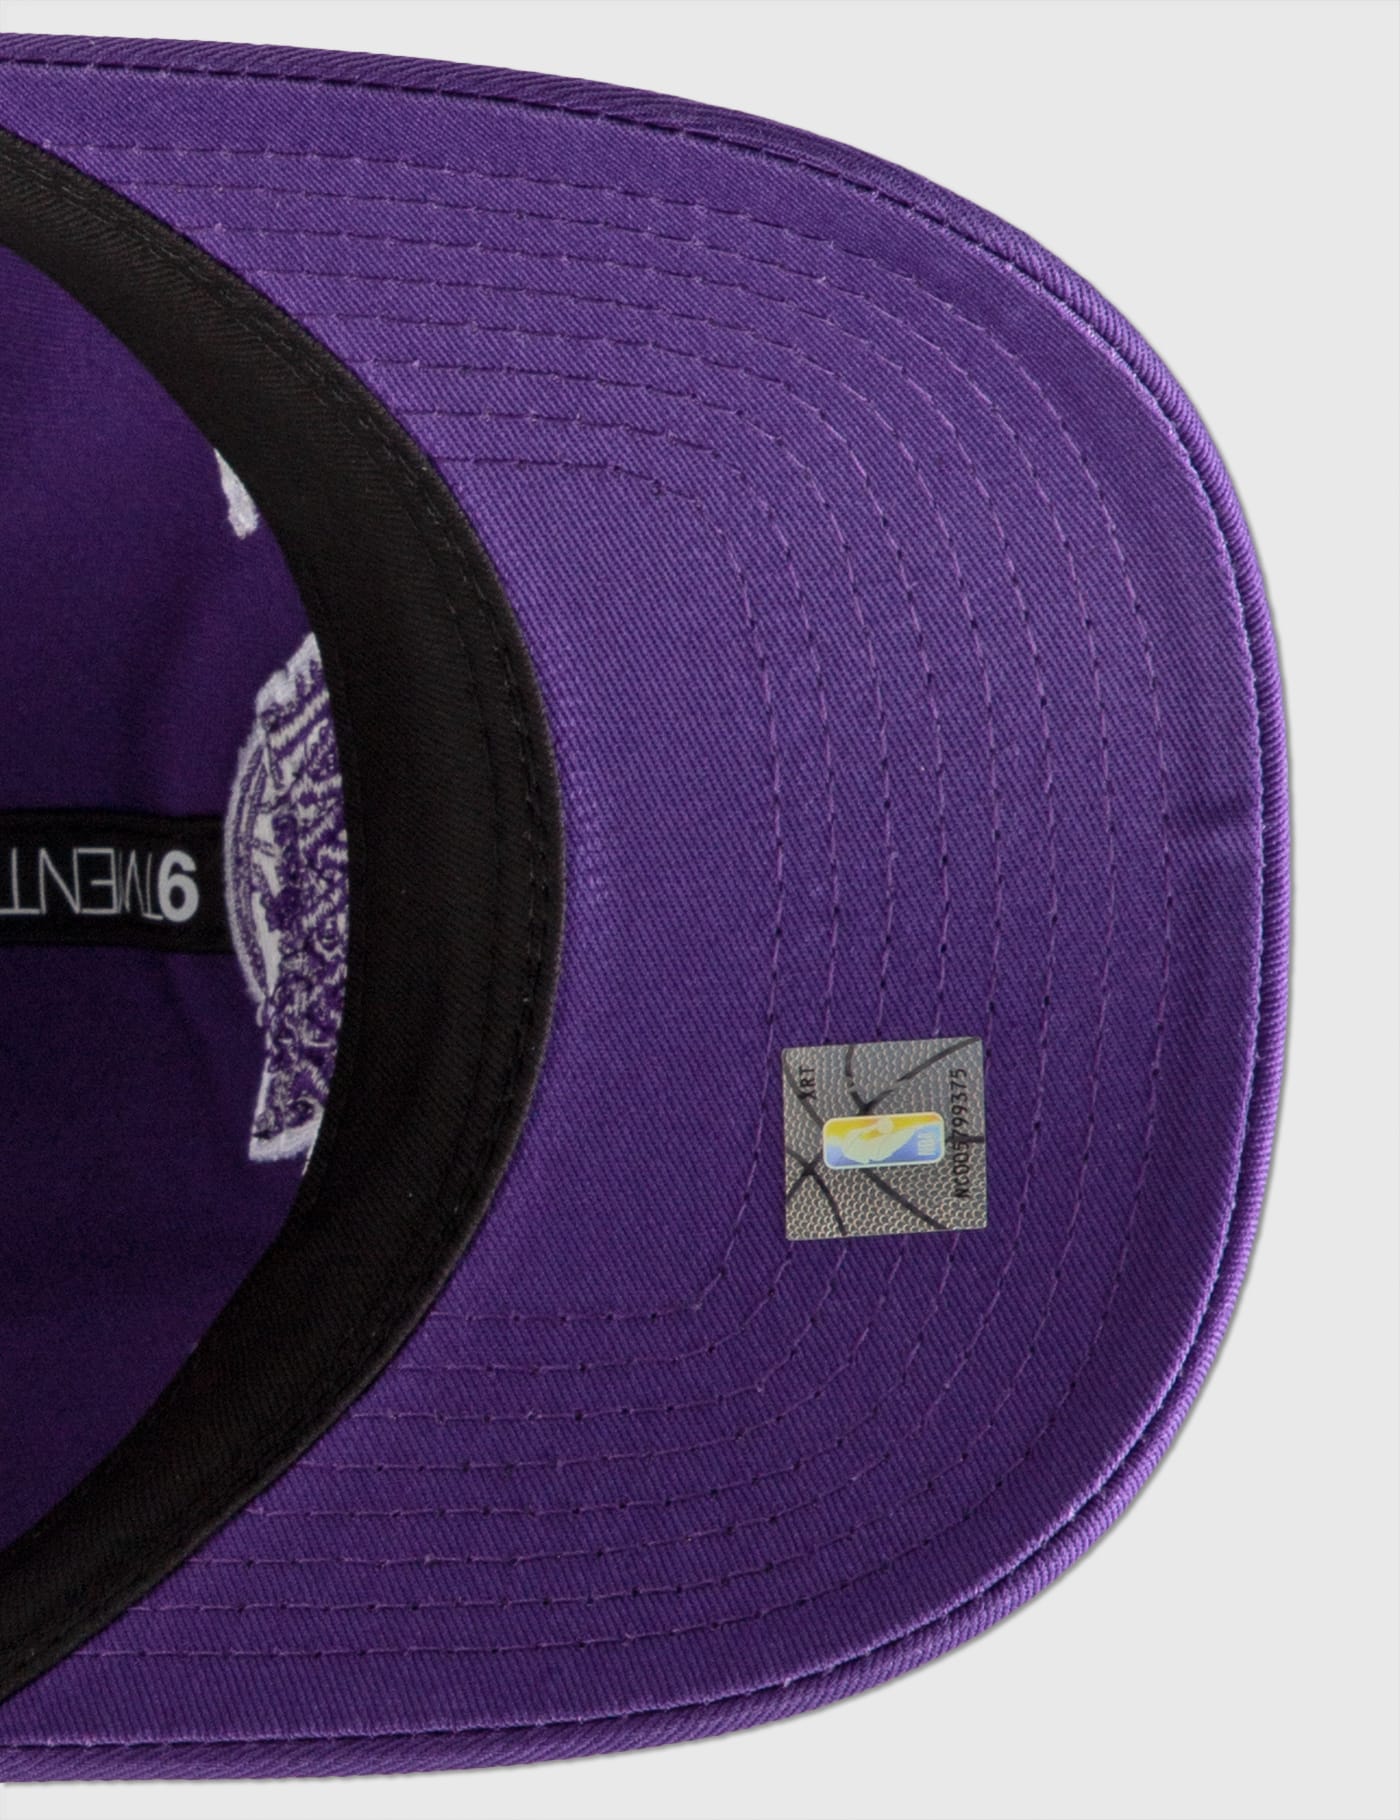 New Era - Staple x NBA Los Angeles Lakers 9TWENTY Cap | HBX - Globally  Curated Fashion and Lifestyle by Hypebeast